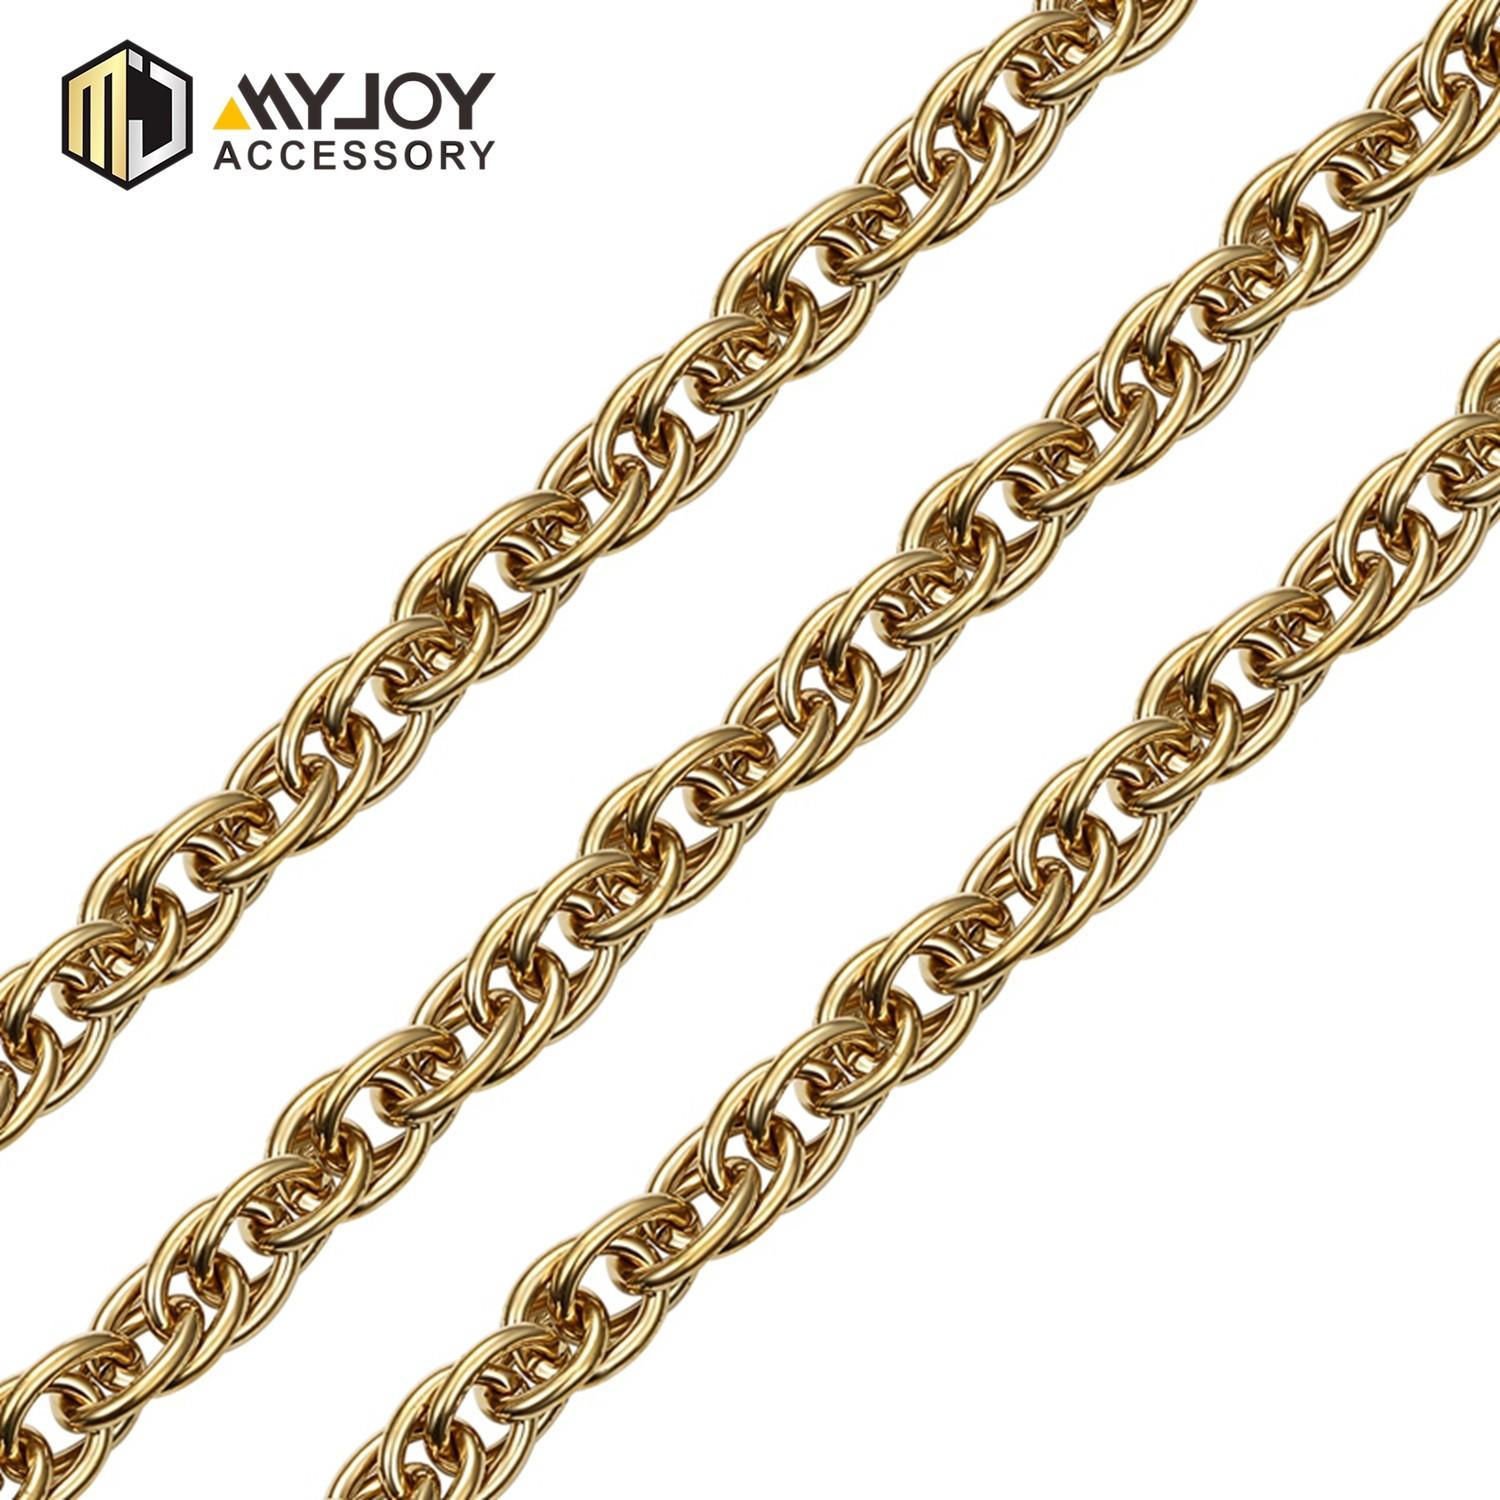 MYJOY Best bag chain company for bags